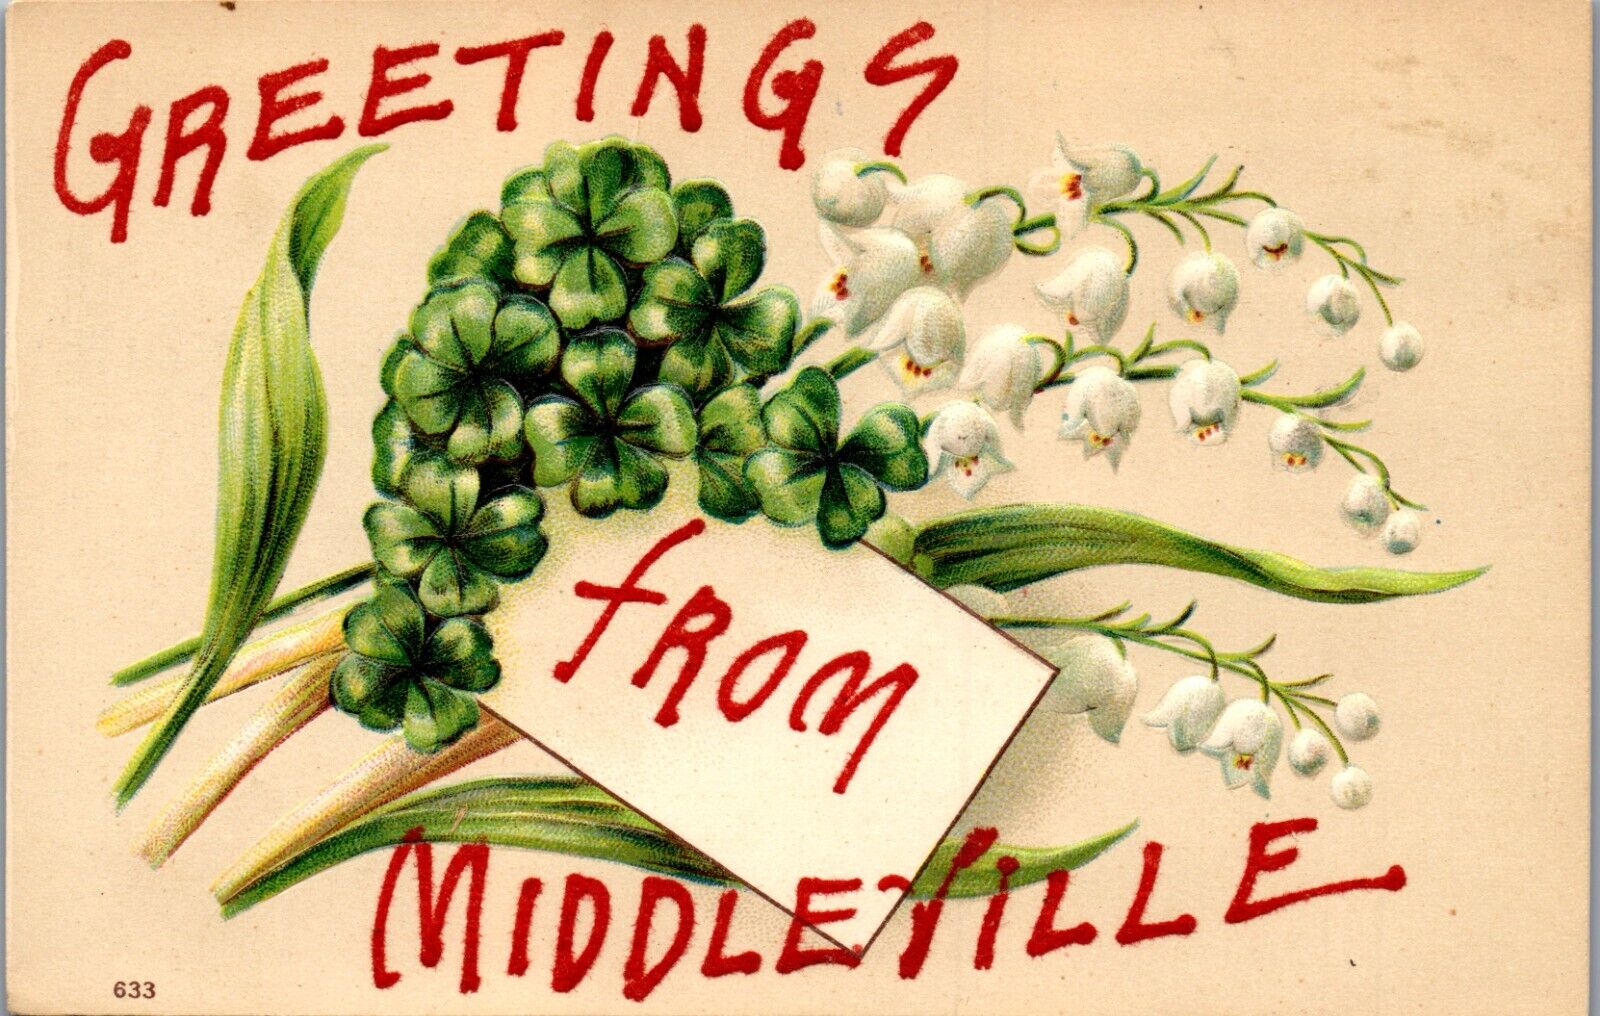 Greetings From Middleville, New York  Postcard (1907) Flowers